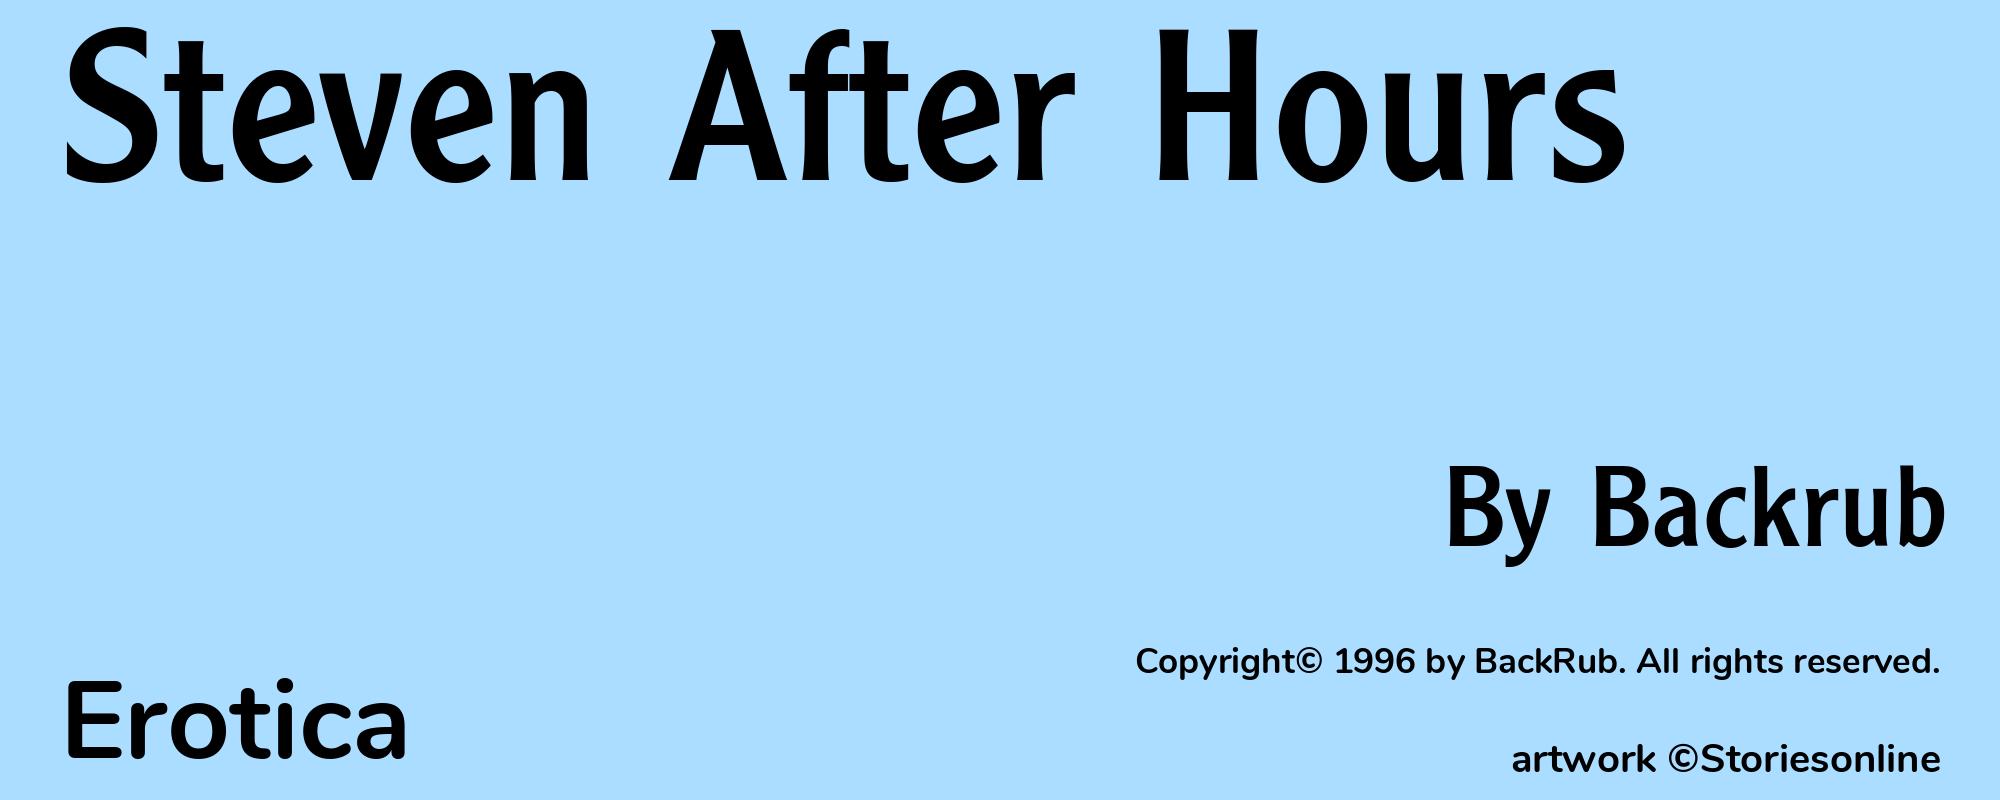 Steven After Hours - Cover